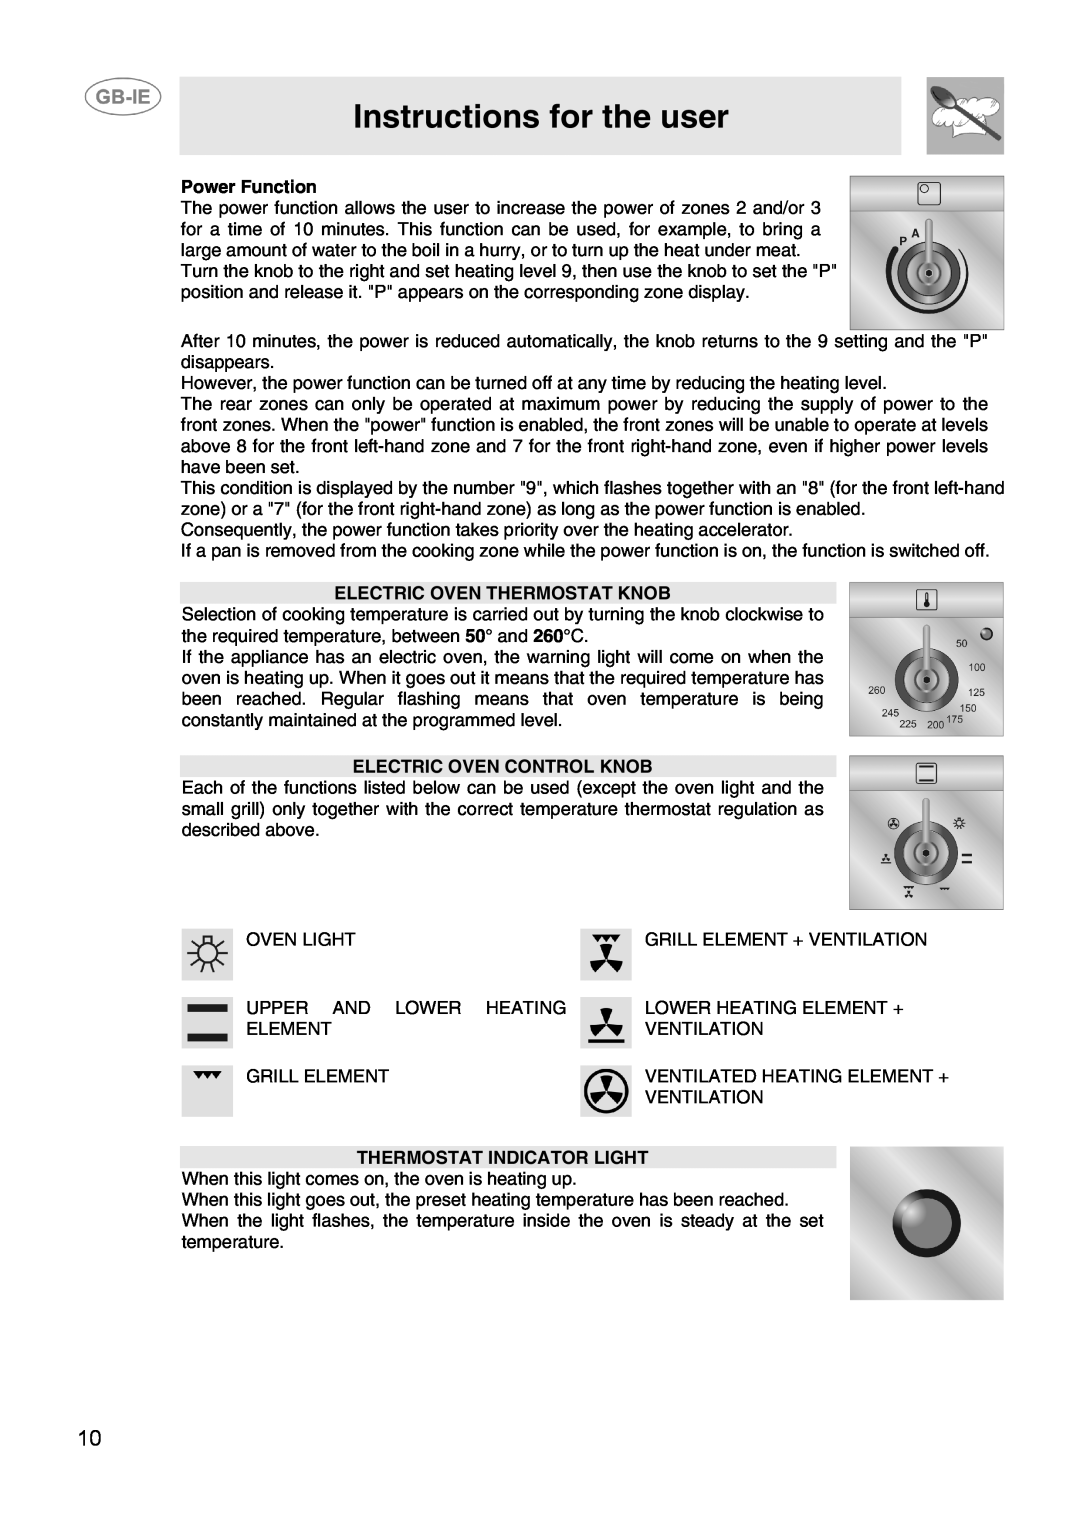 Smeg CIX64MS manual Instructions for the user, Power Function, Electric Oven Thermostat Knob, Electric Oven Control Knob 